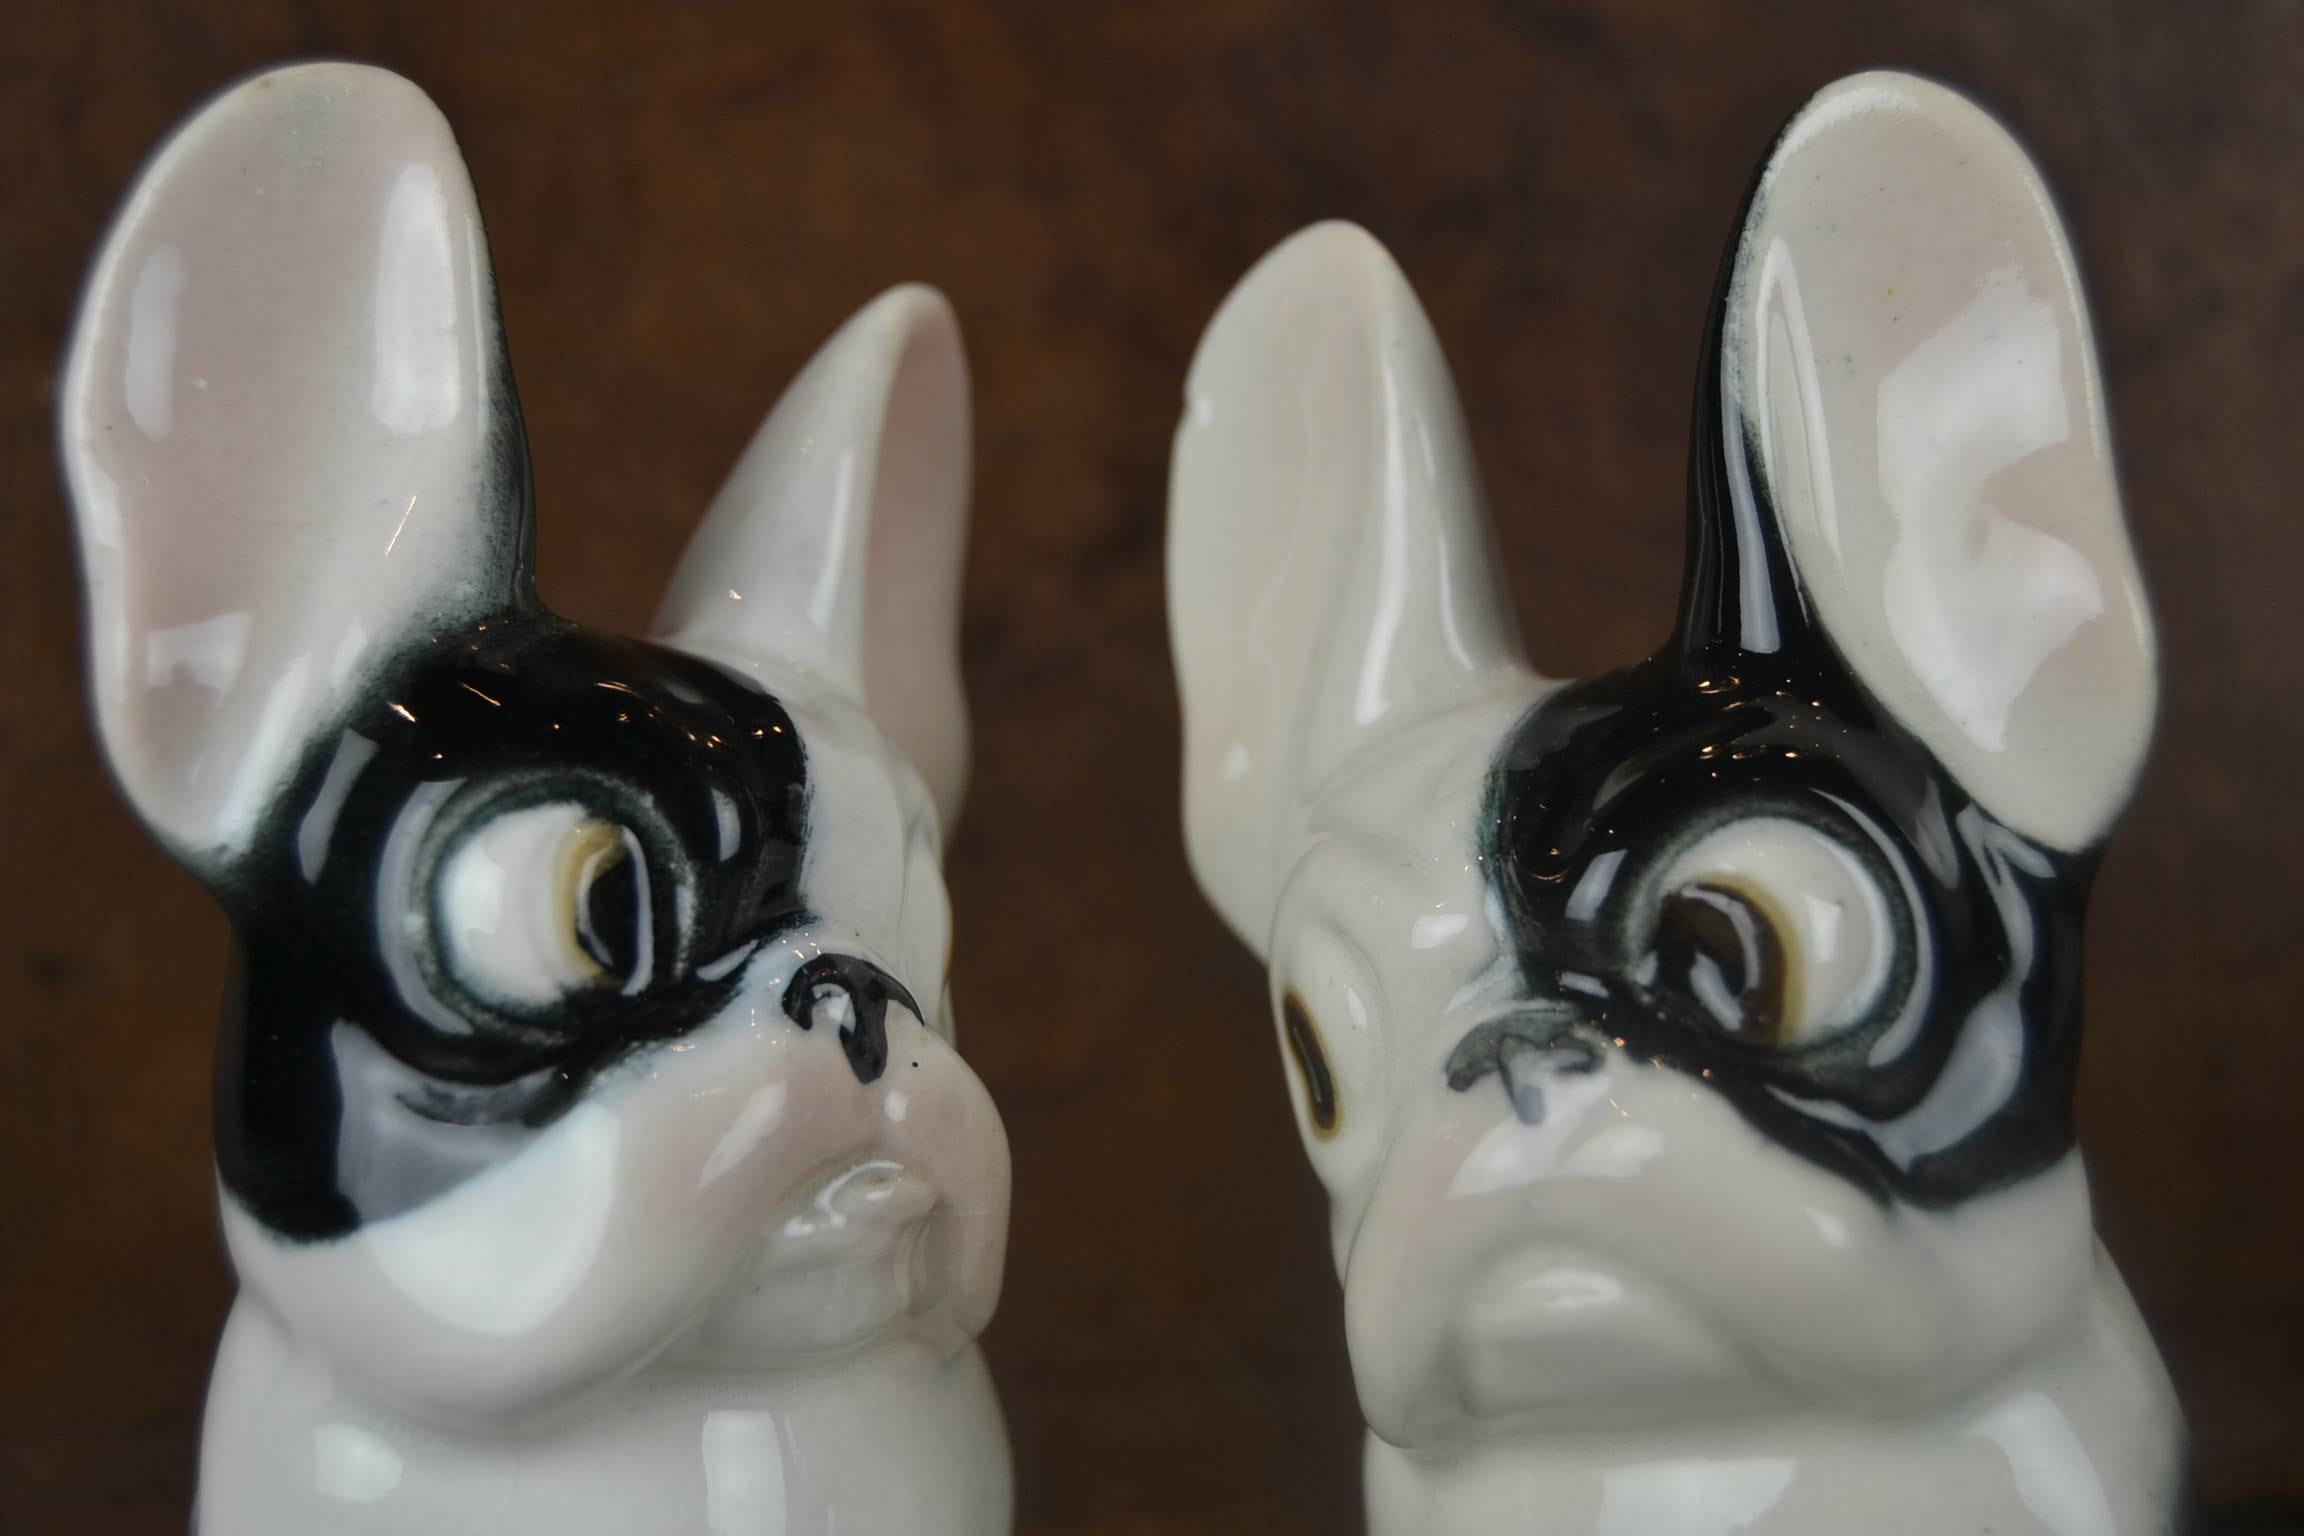 Set of two French Bulldog, Boston Terrier figurines.
Vintage porcelain dog figurines.
Caricature statues with very long ears and big eyes - two dogs in love.
The left Frenchie has been hurt on the tail and has a little chip on the ear.
The right